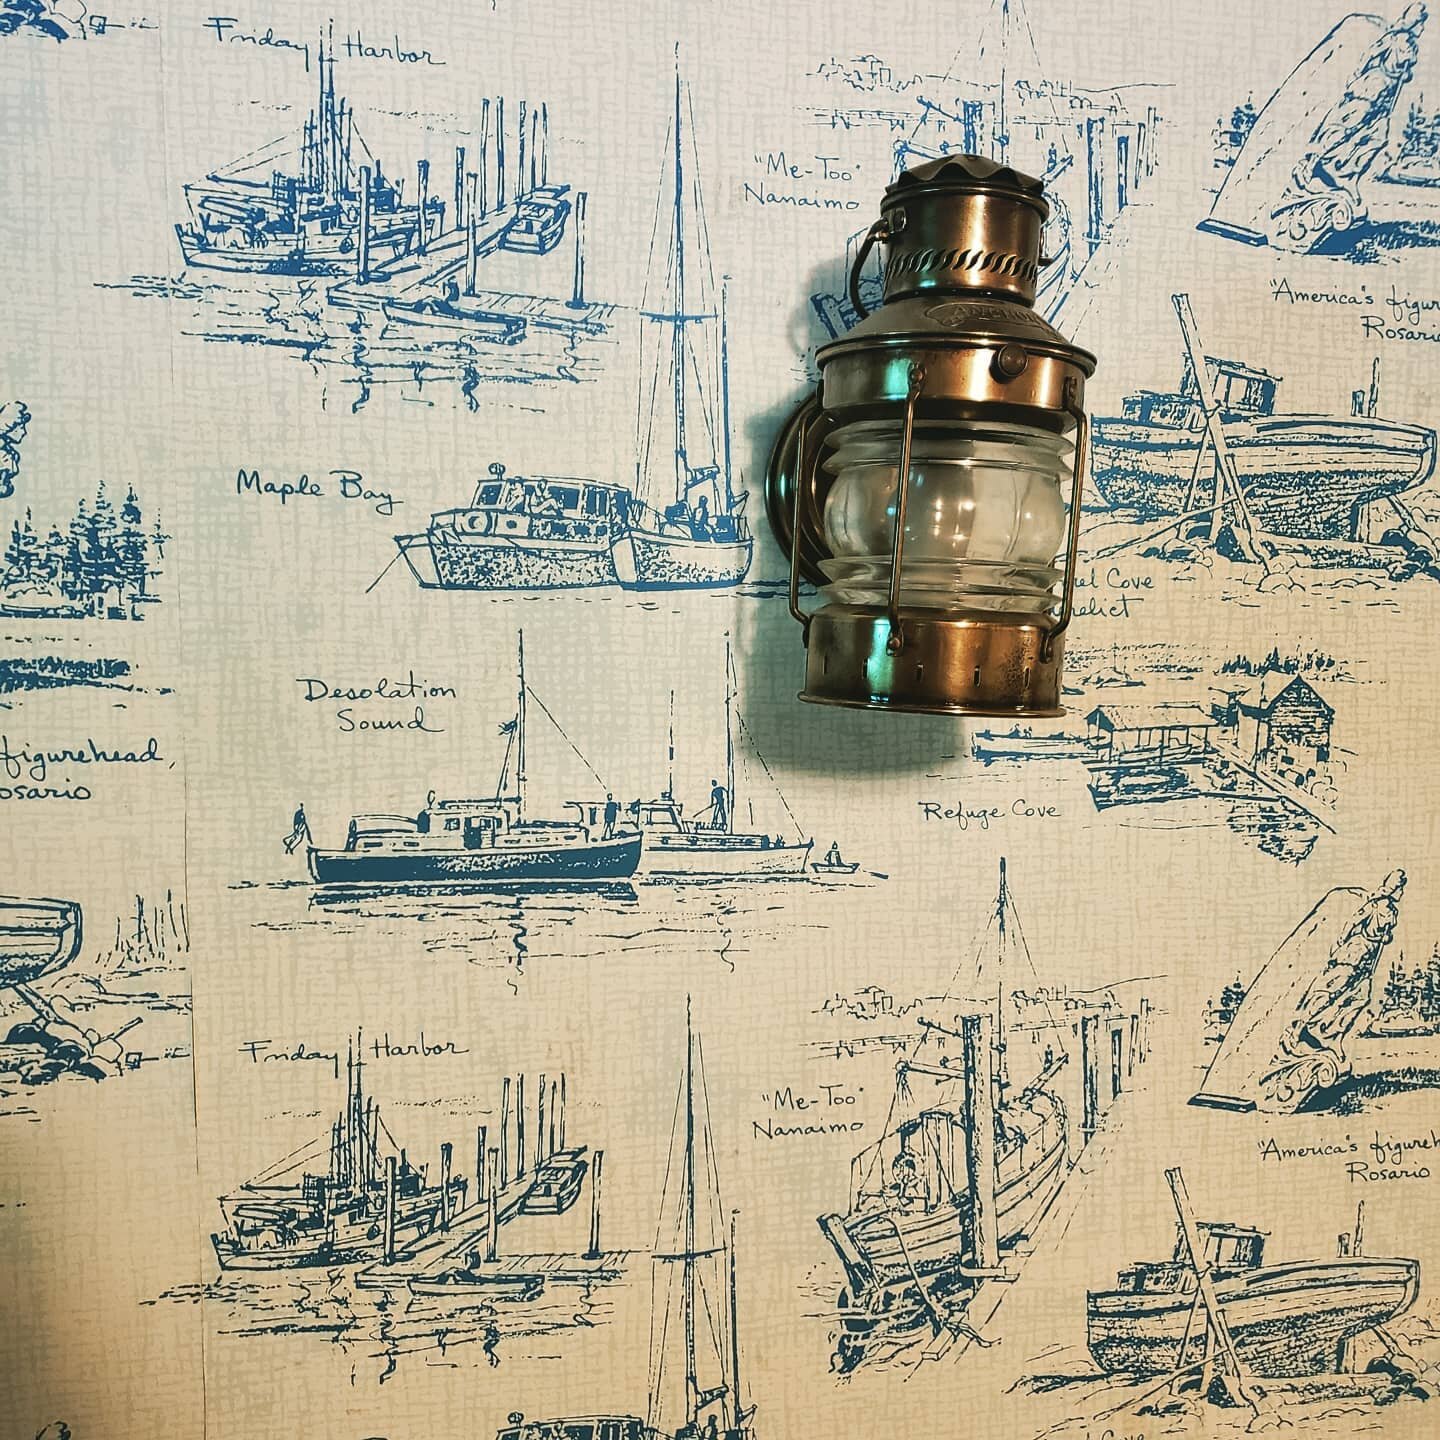 Closing on this baby this week! This buyer has a vintage nautical collection to embellish this rumpus room. 😄 love it!
.
.
#vintagewallpaper #wallpaper #boat #ship #sail #sailing #nautical #periodwallpaper #pdxrealestatebroker #ownyourhome #buyahous